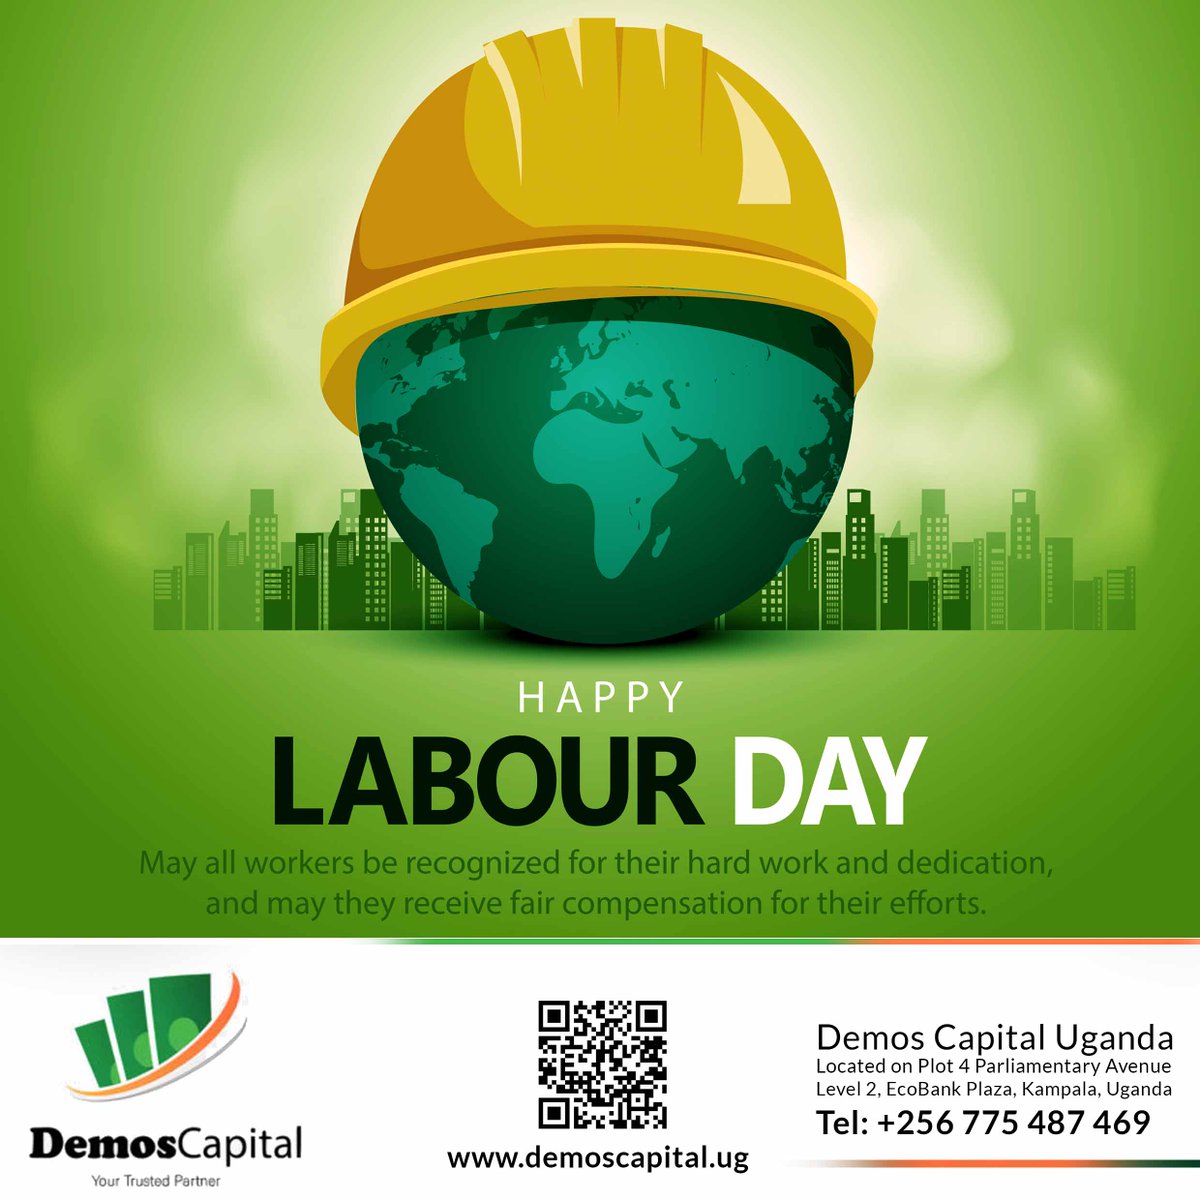 Happy Labor Day! Demos Capital offers tailored loans to support your business goals. Whether you're expanding operations or need working capital, we've got you covered. Let's celebrate your hard work with financial solutions that empower! #LaborDay #FinancialSupport